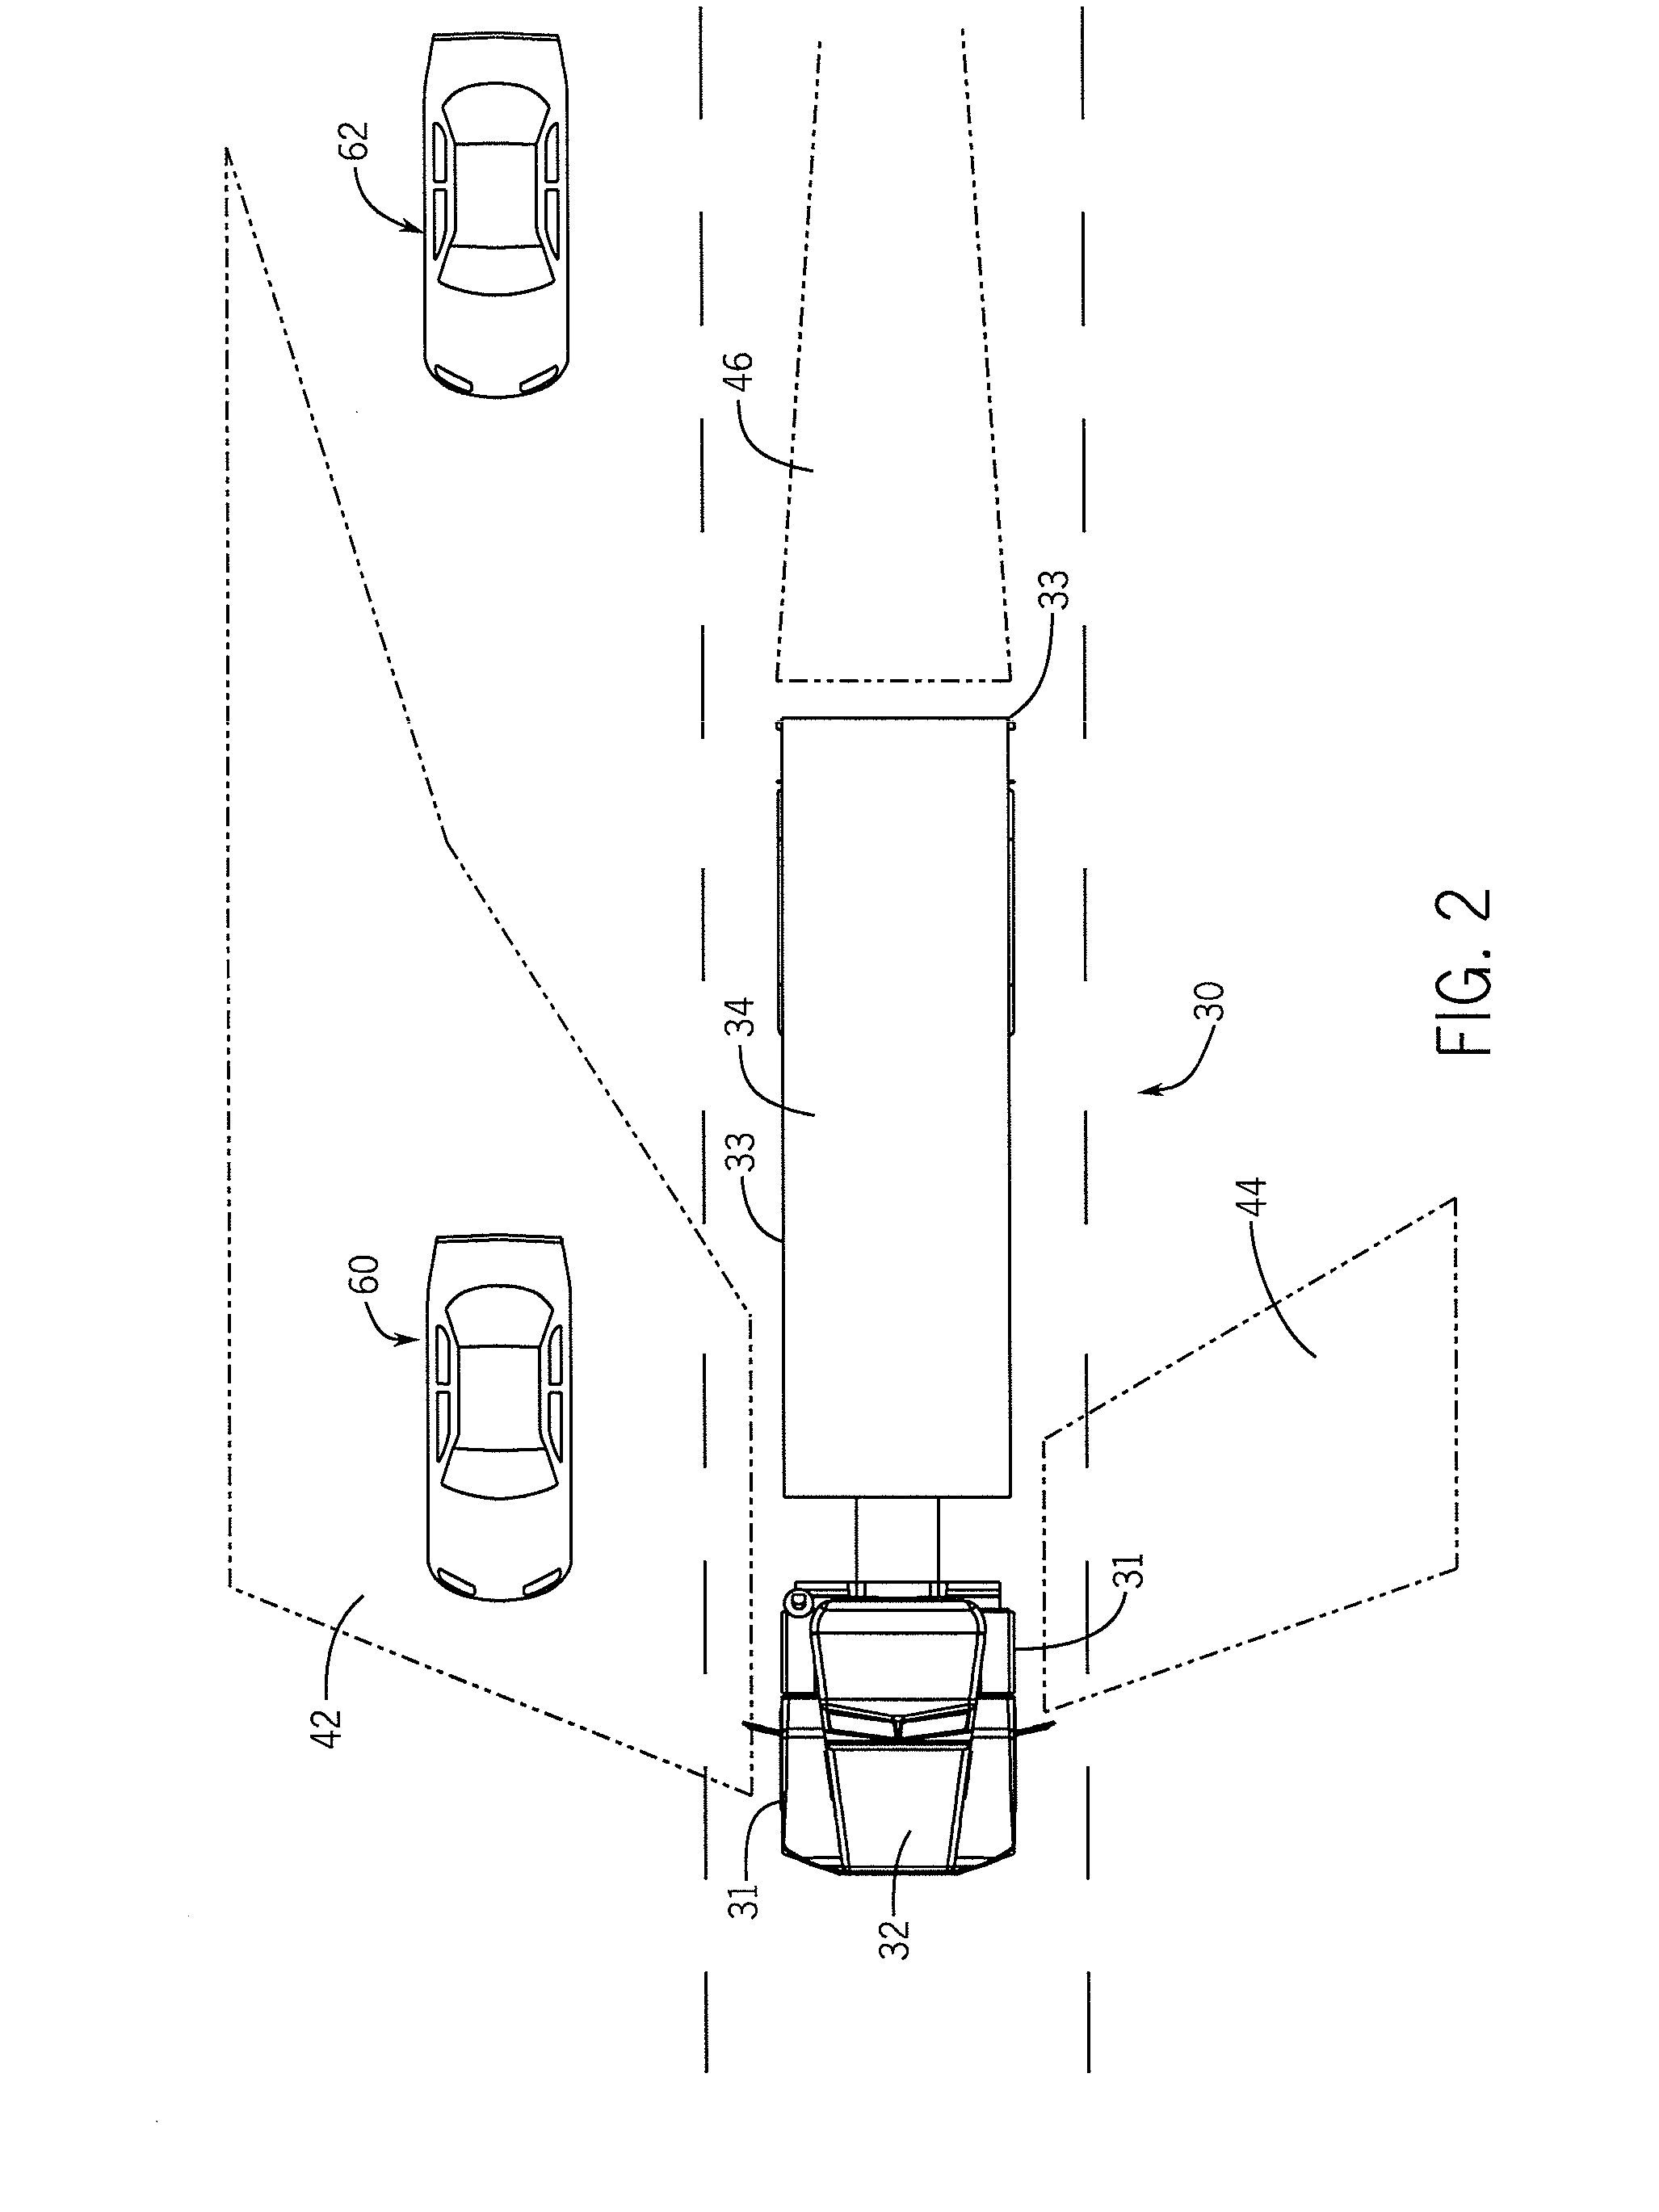 Blind spot warning apparatus, assembly and method